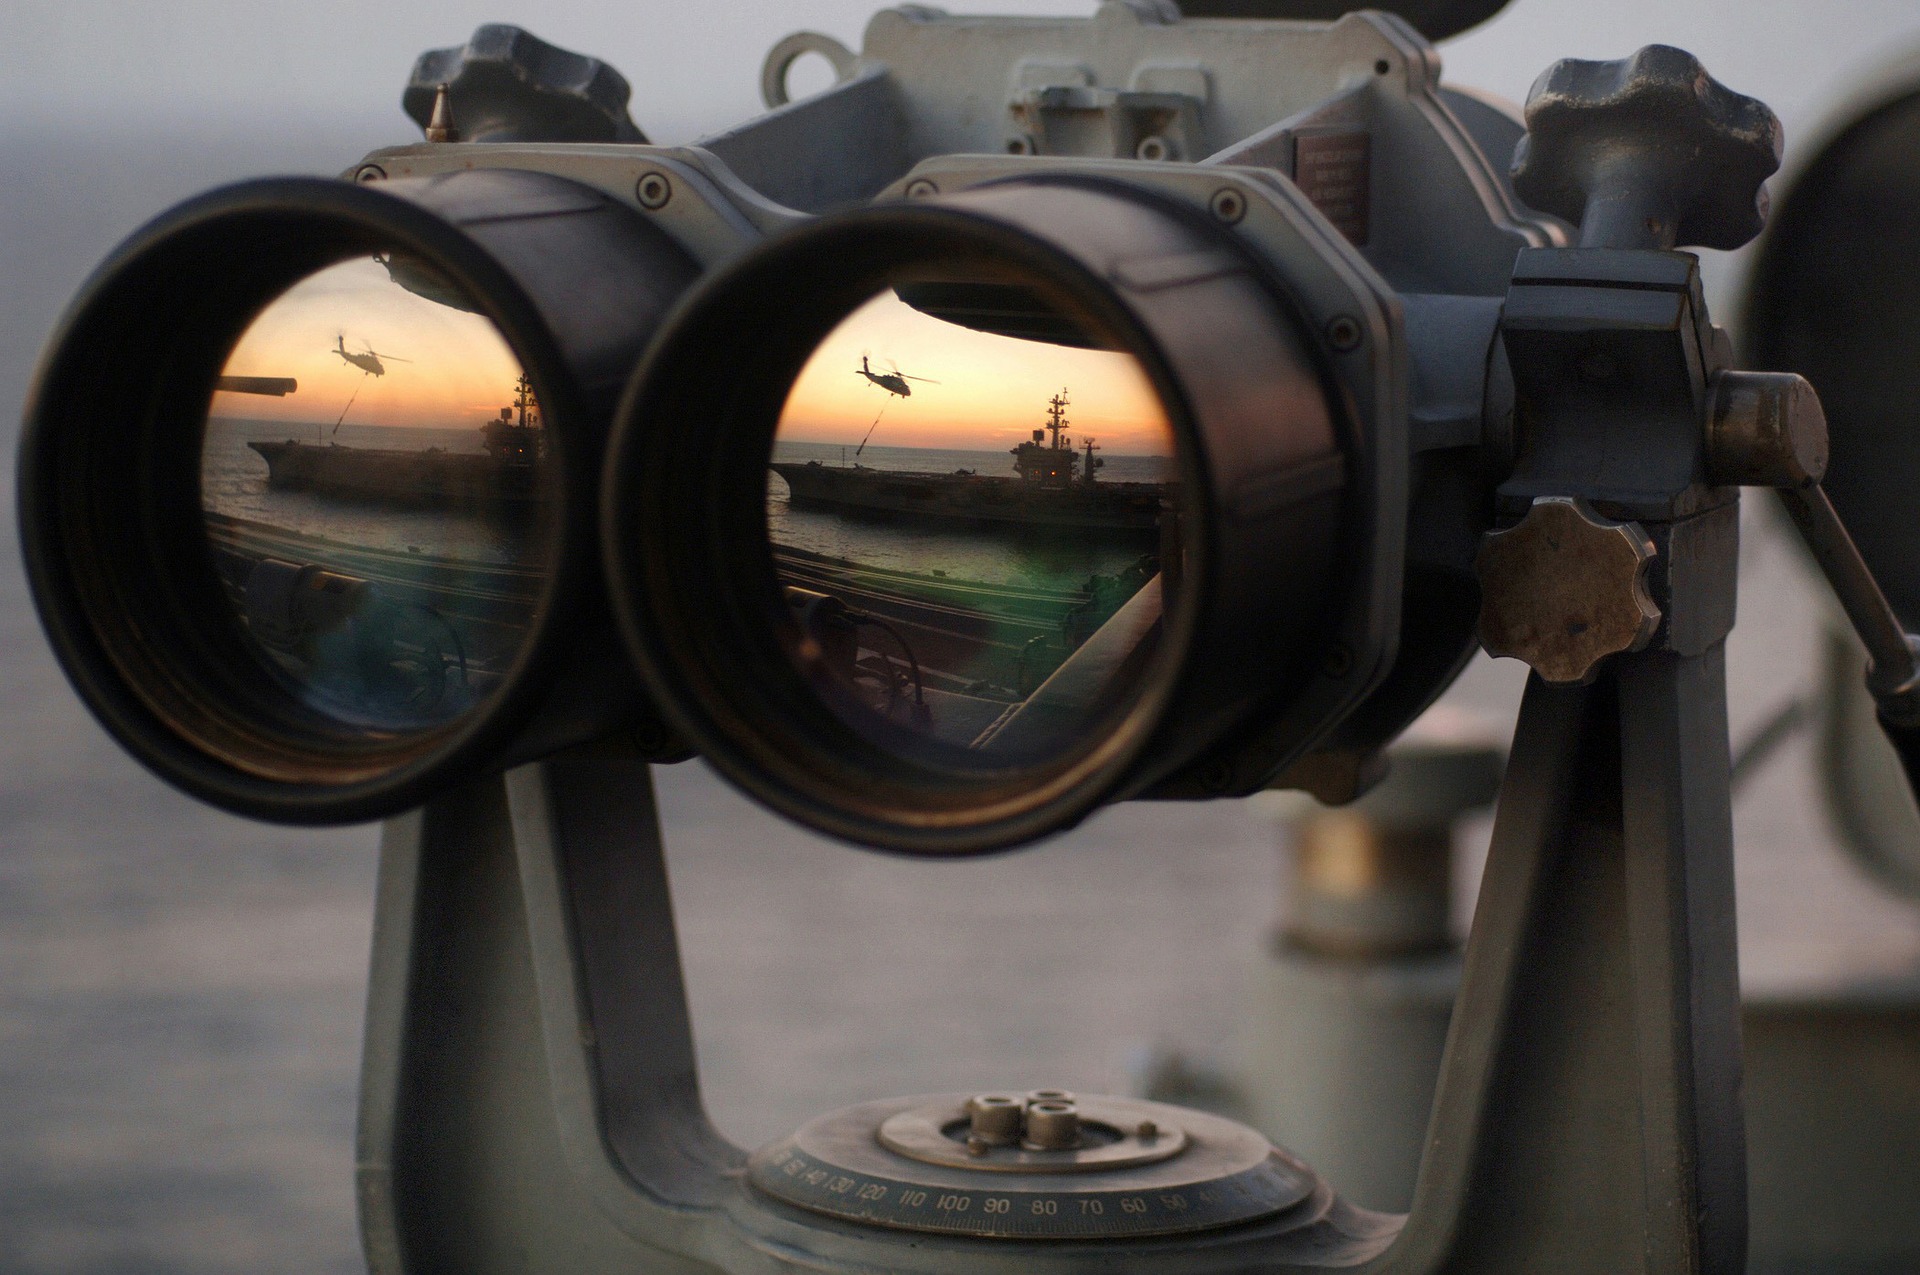 Binoculars are a great tool for spying